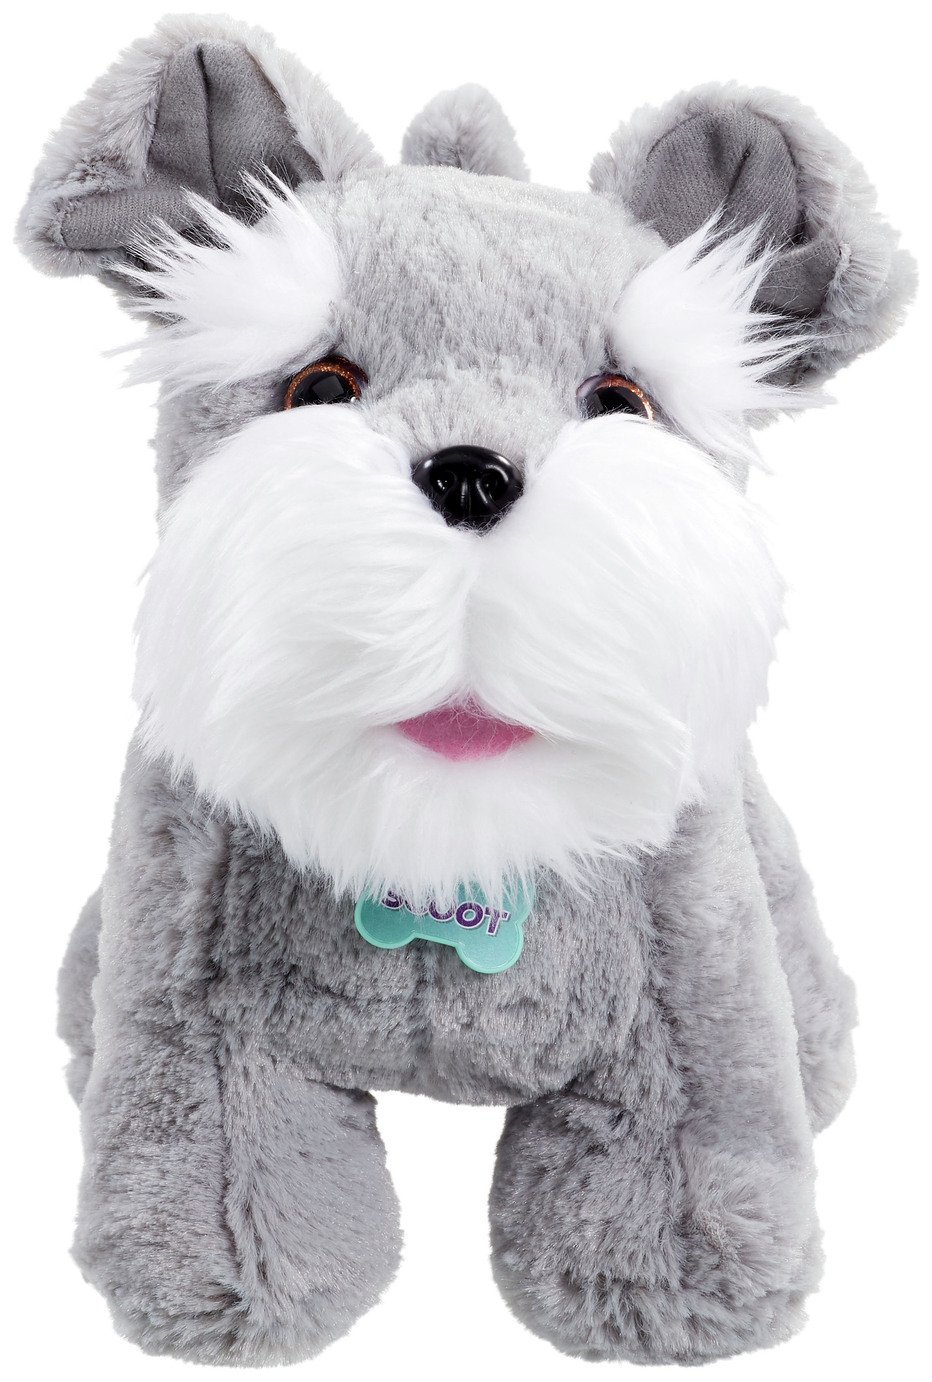 AniMagic Scoot the Puppy Soft Toy Review